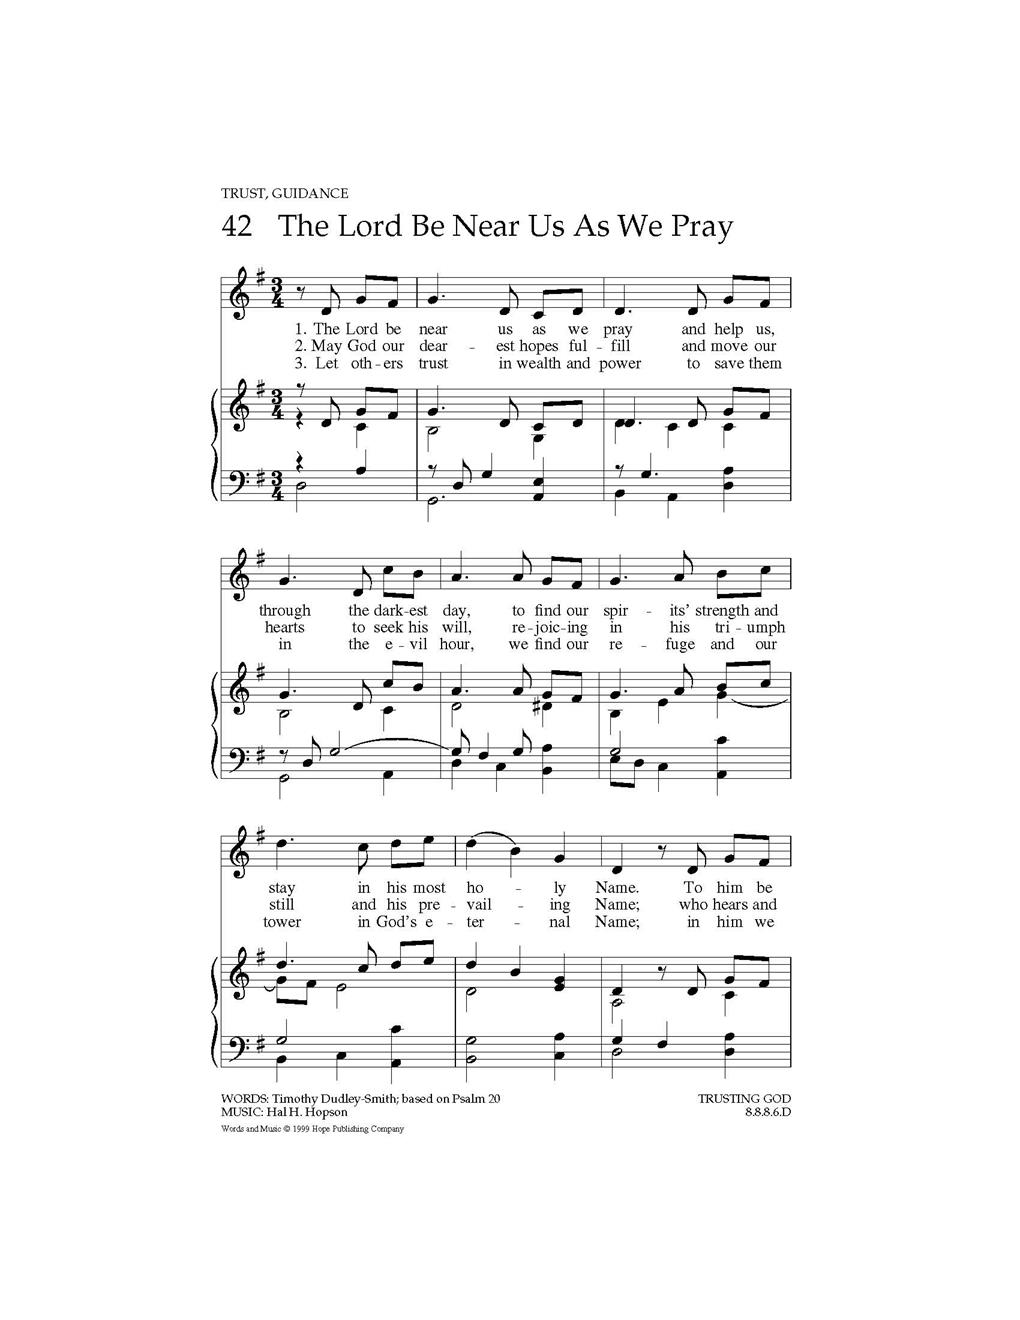 The Lord Be Near Us as We Pray Cover Image